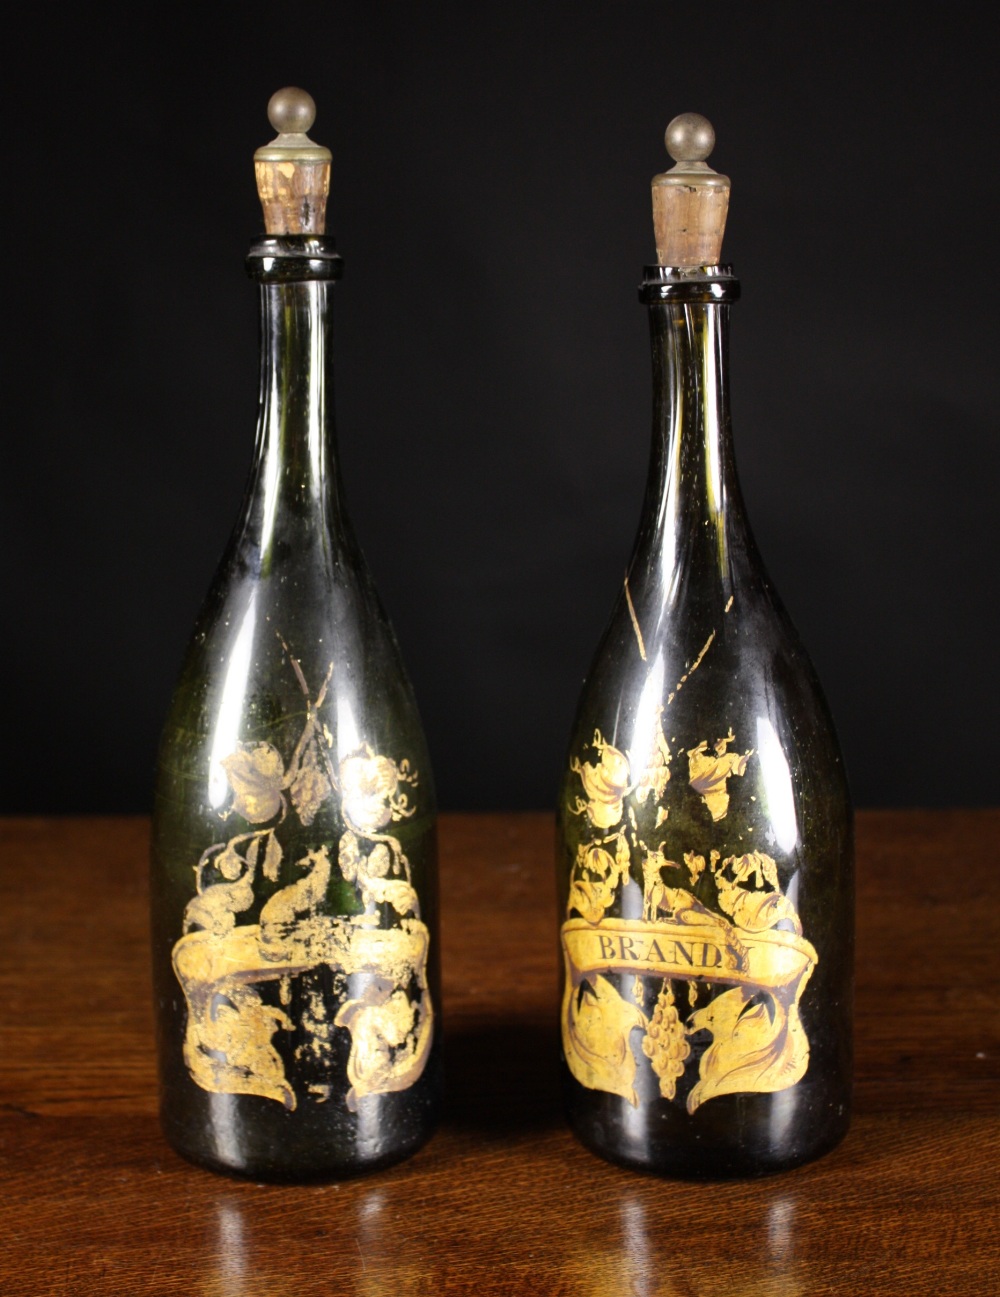 A Pair of Late 18th Century Green Glass Bottle Decanters with kick-up bases and painted gilt